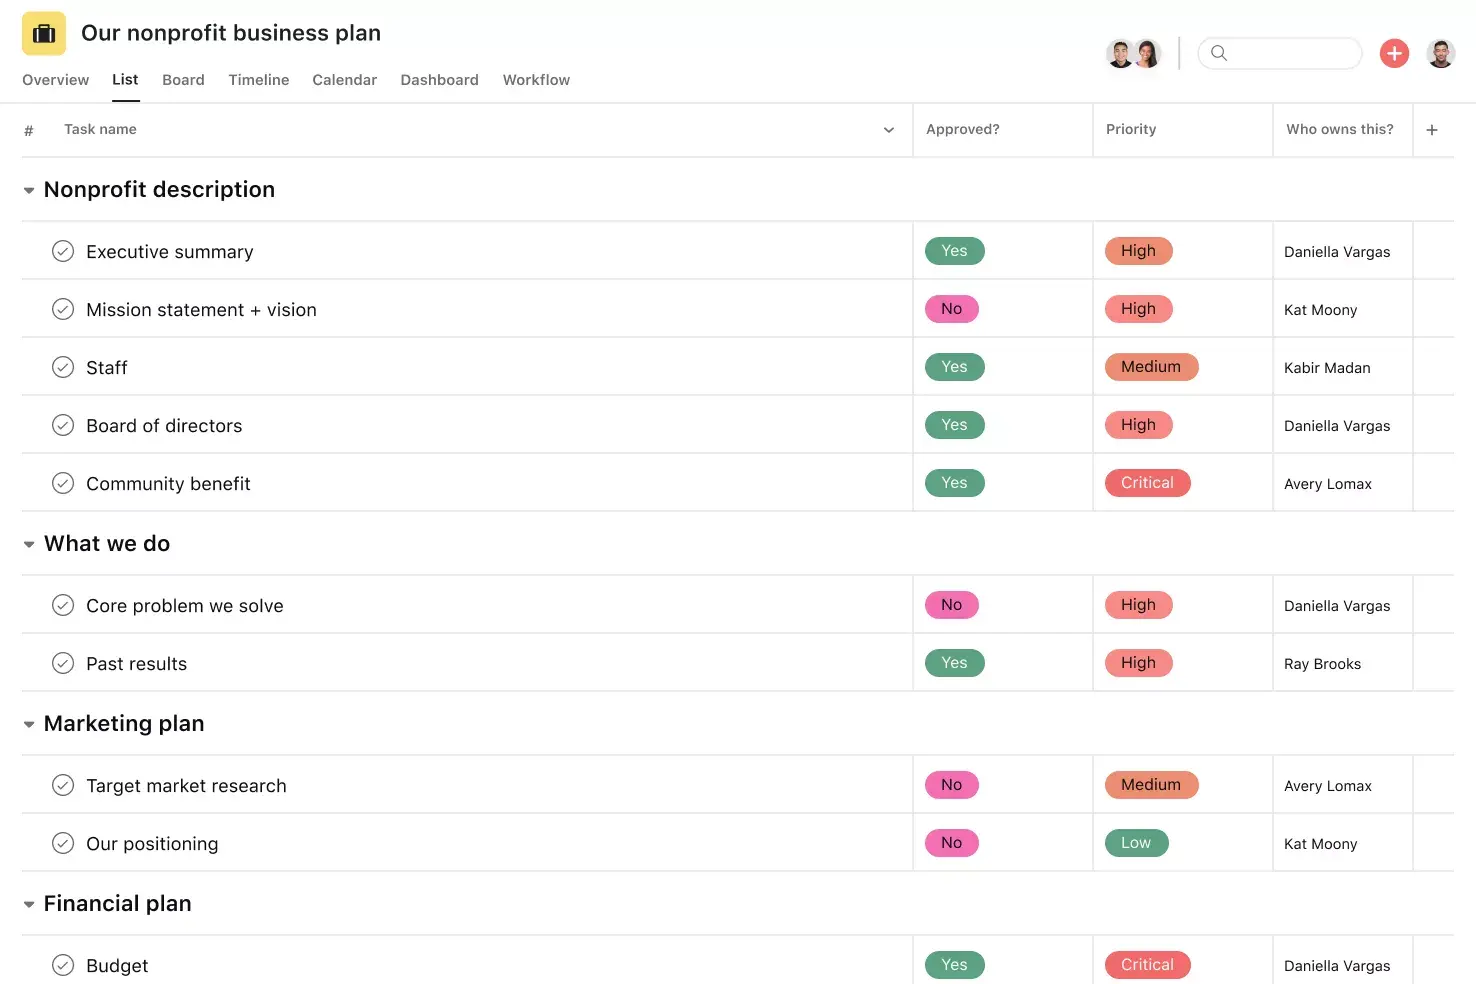 [Product ui] Nonprofit business plan project in Asana, spreadsheet-style project view (List)